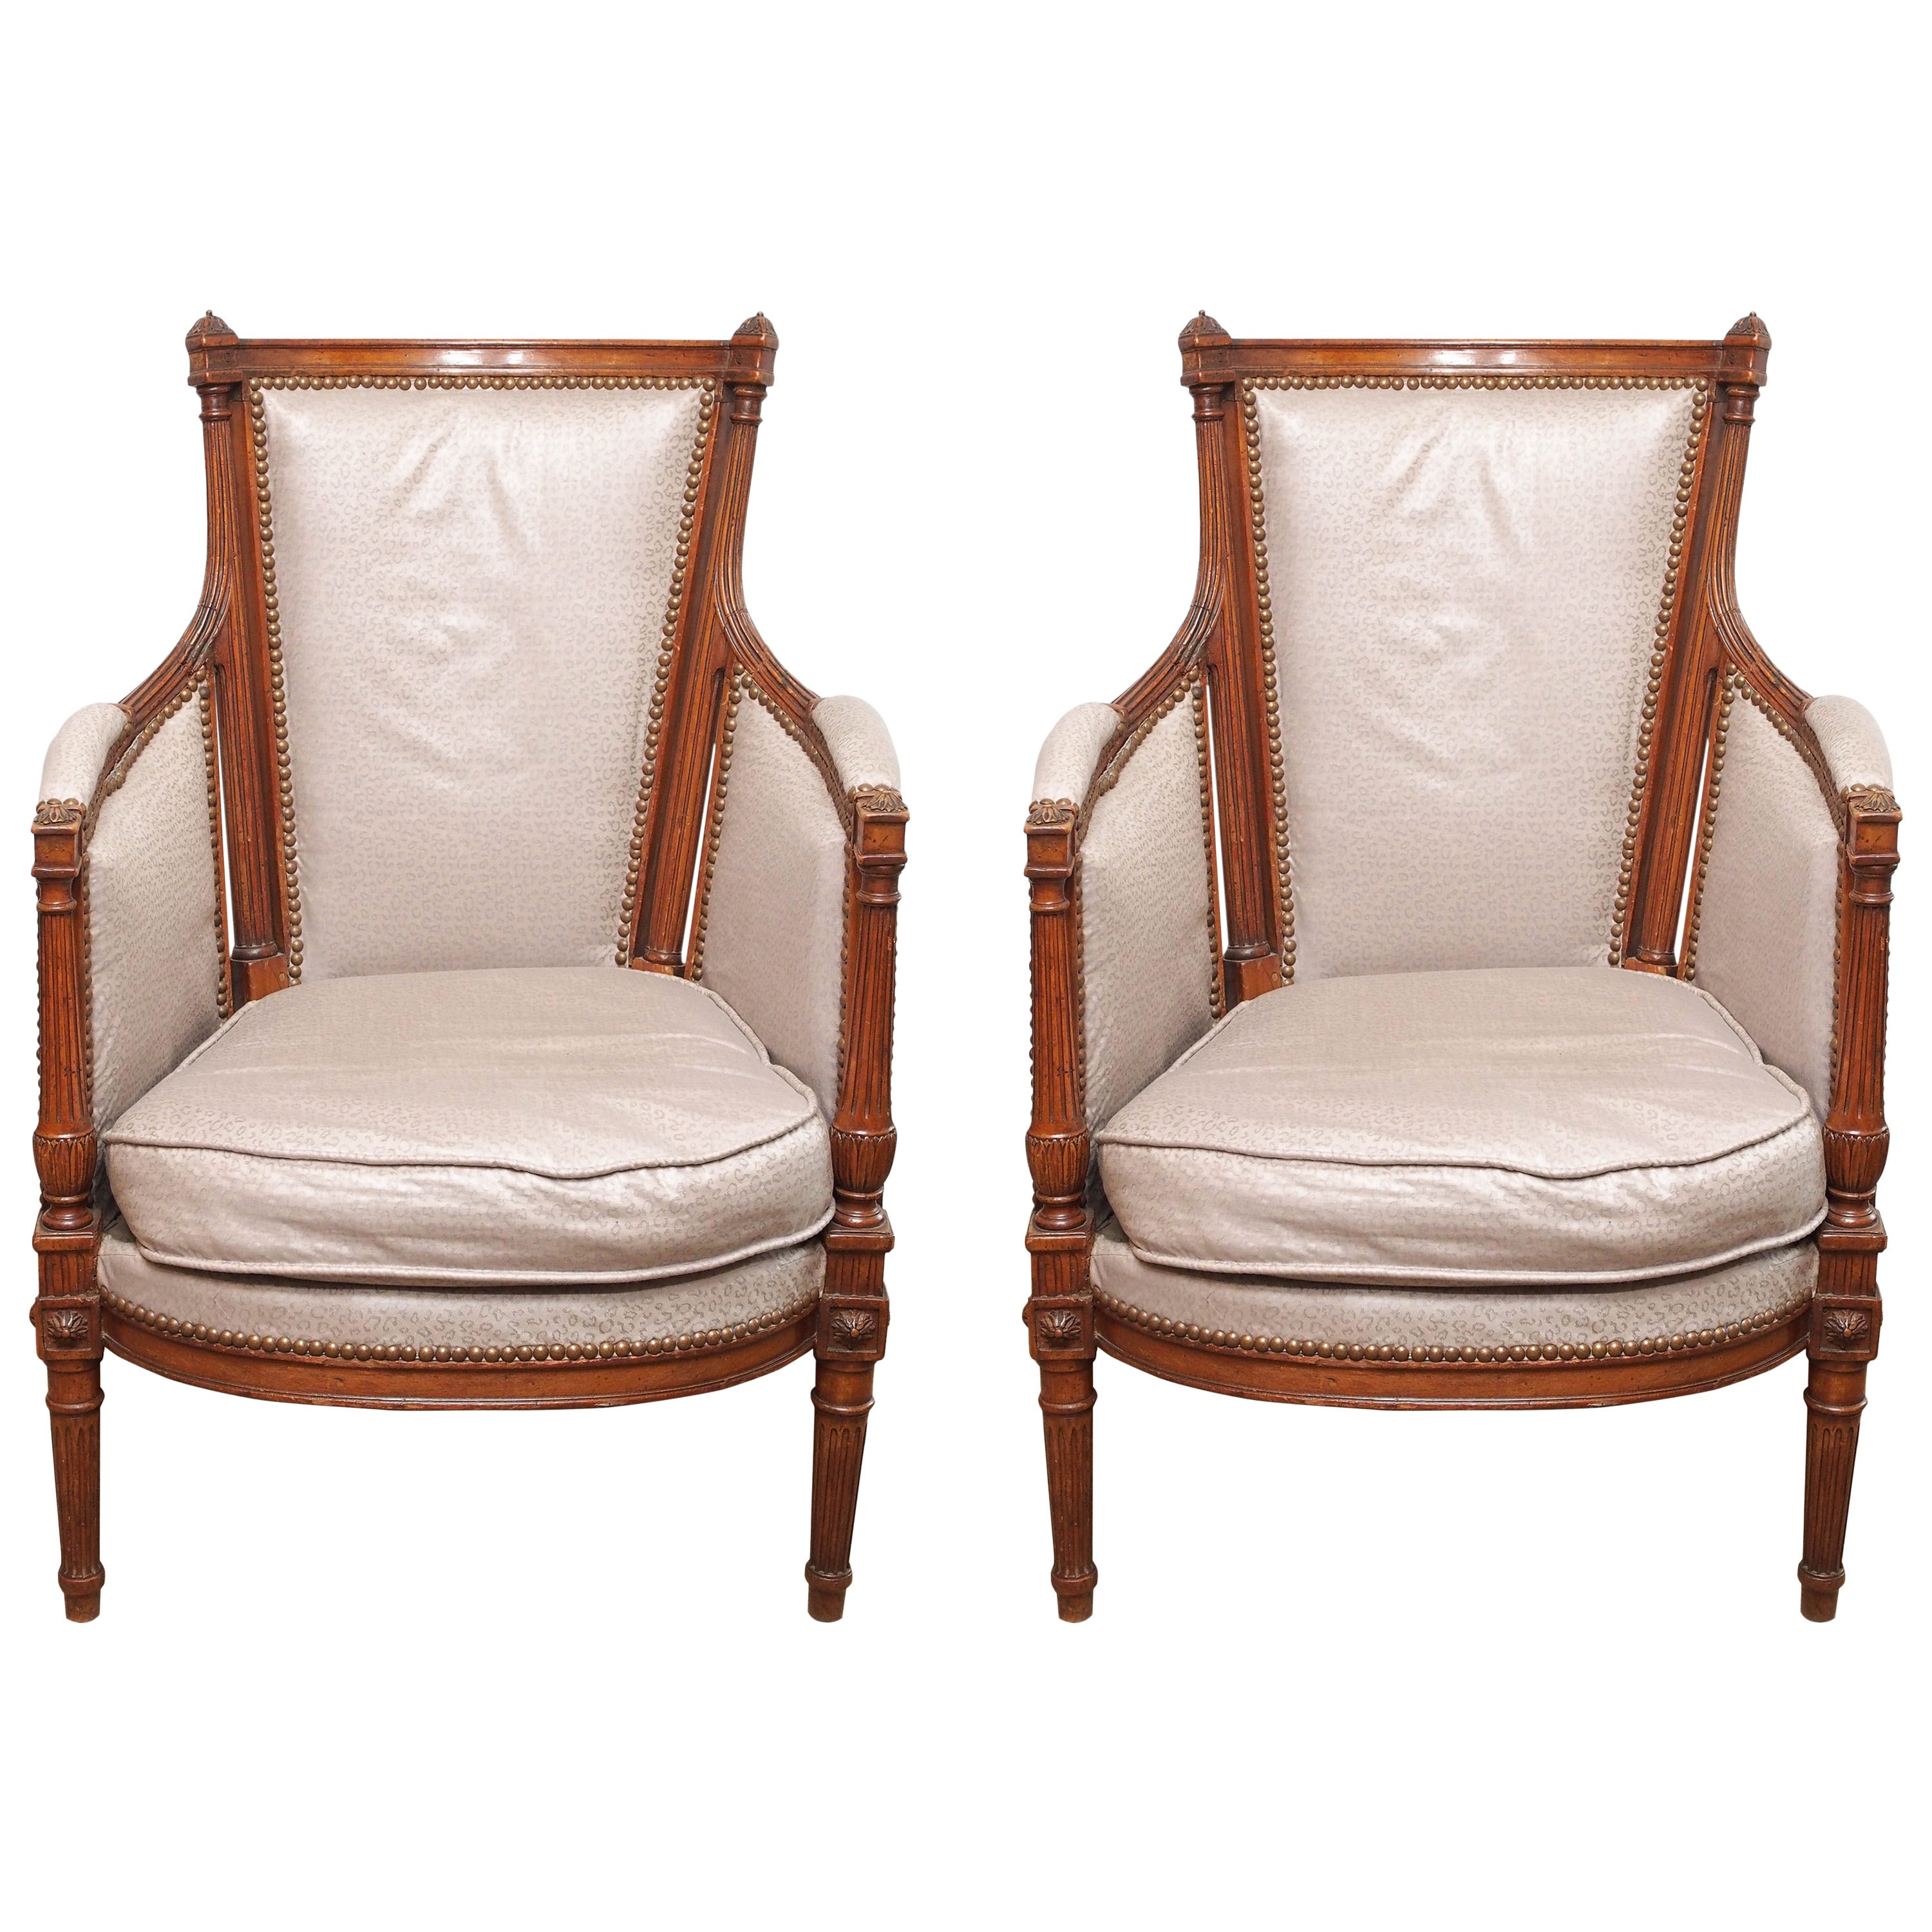 Pair antique French walnut Louis XVI upholstered bergeres